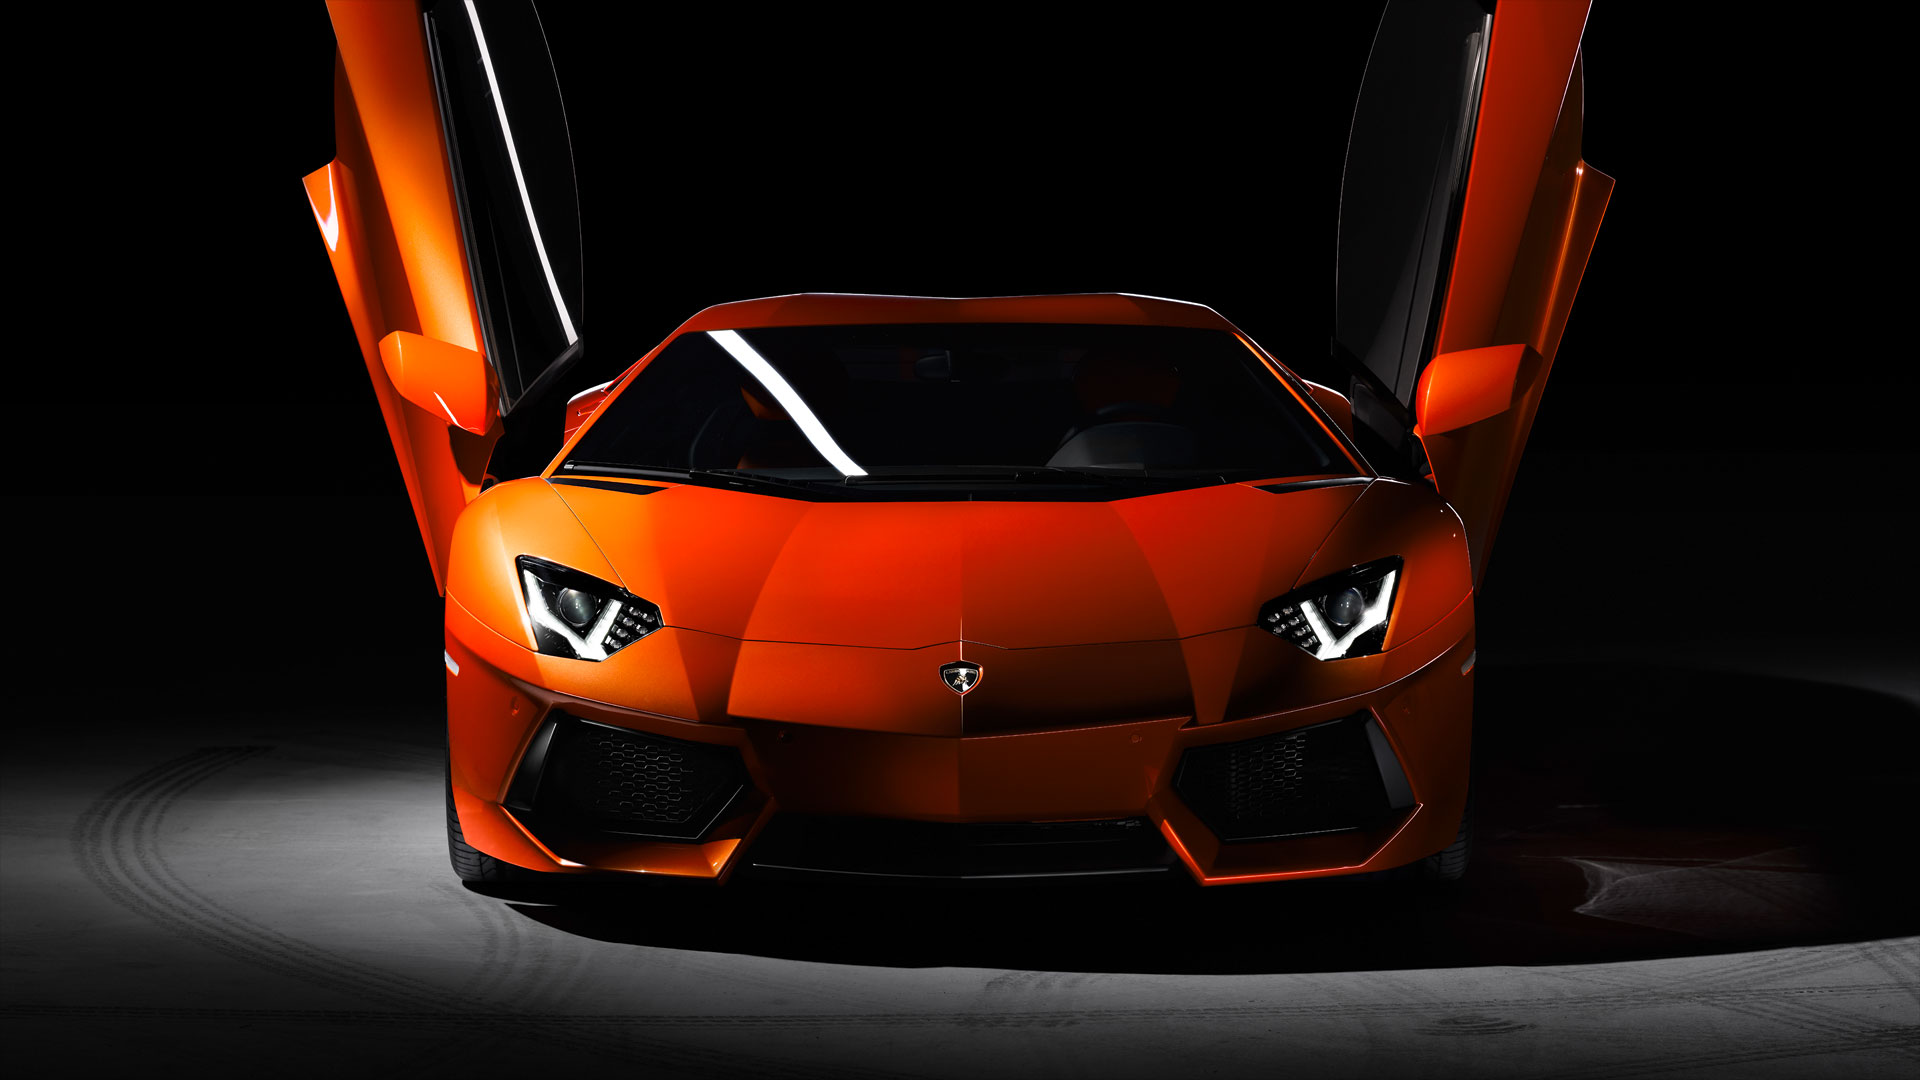 just arrived from the future: the lamborghini aventador at luxury car